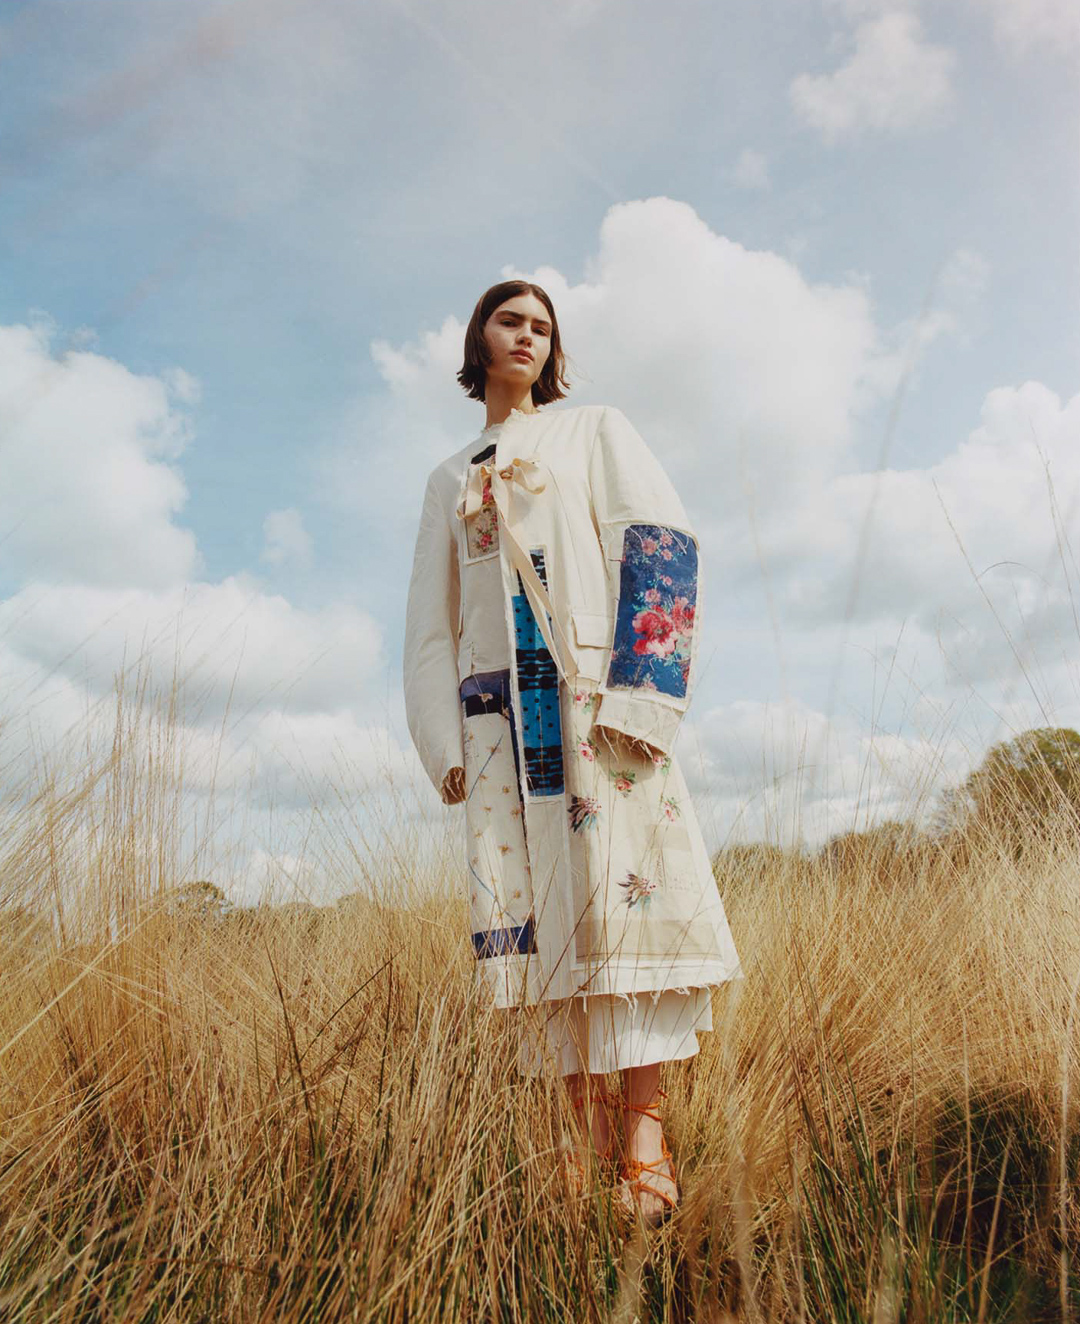 Laura McCluskey for Grazia UK with Ana Milojevic - Fashion Editorials